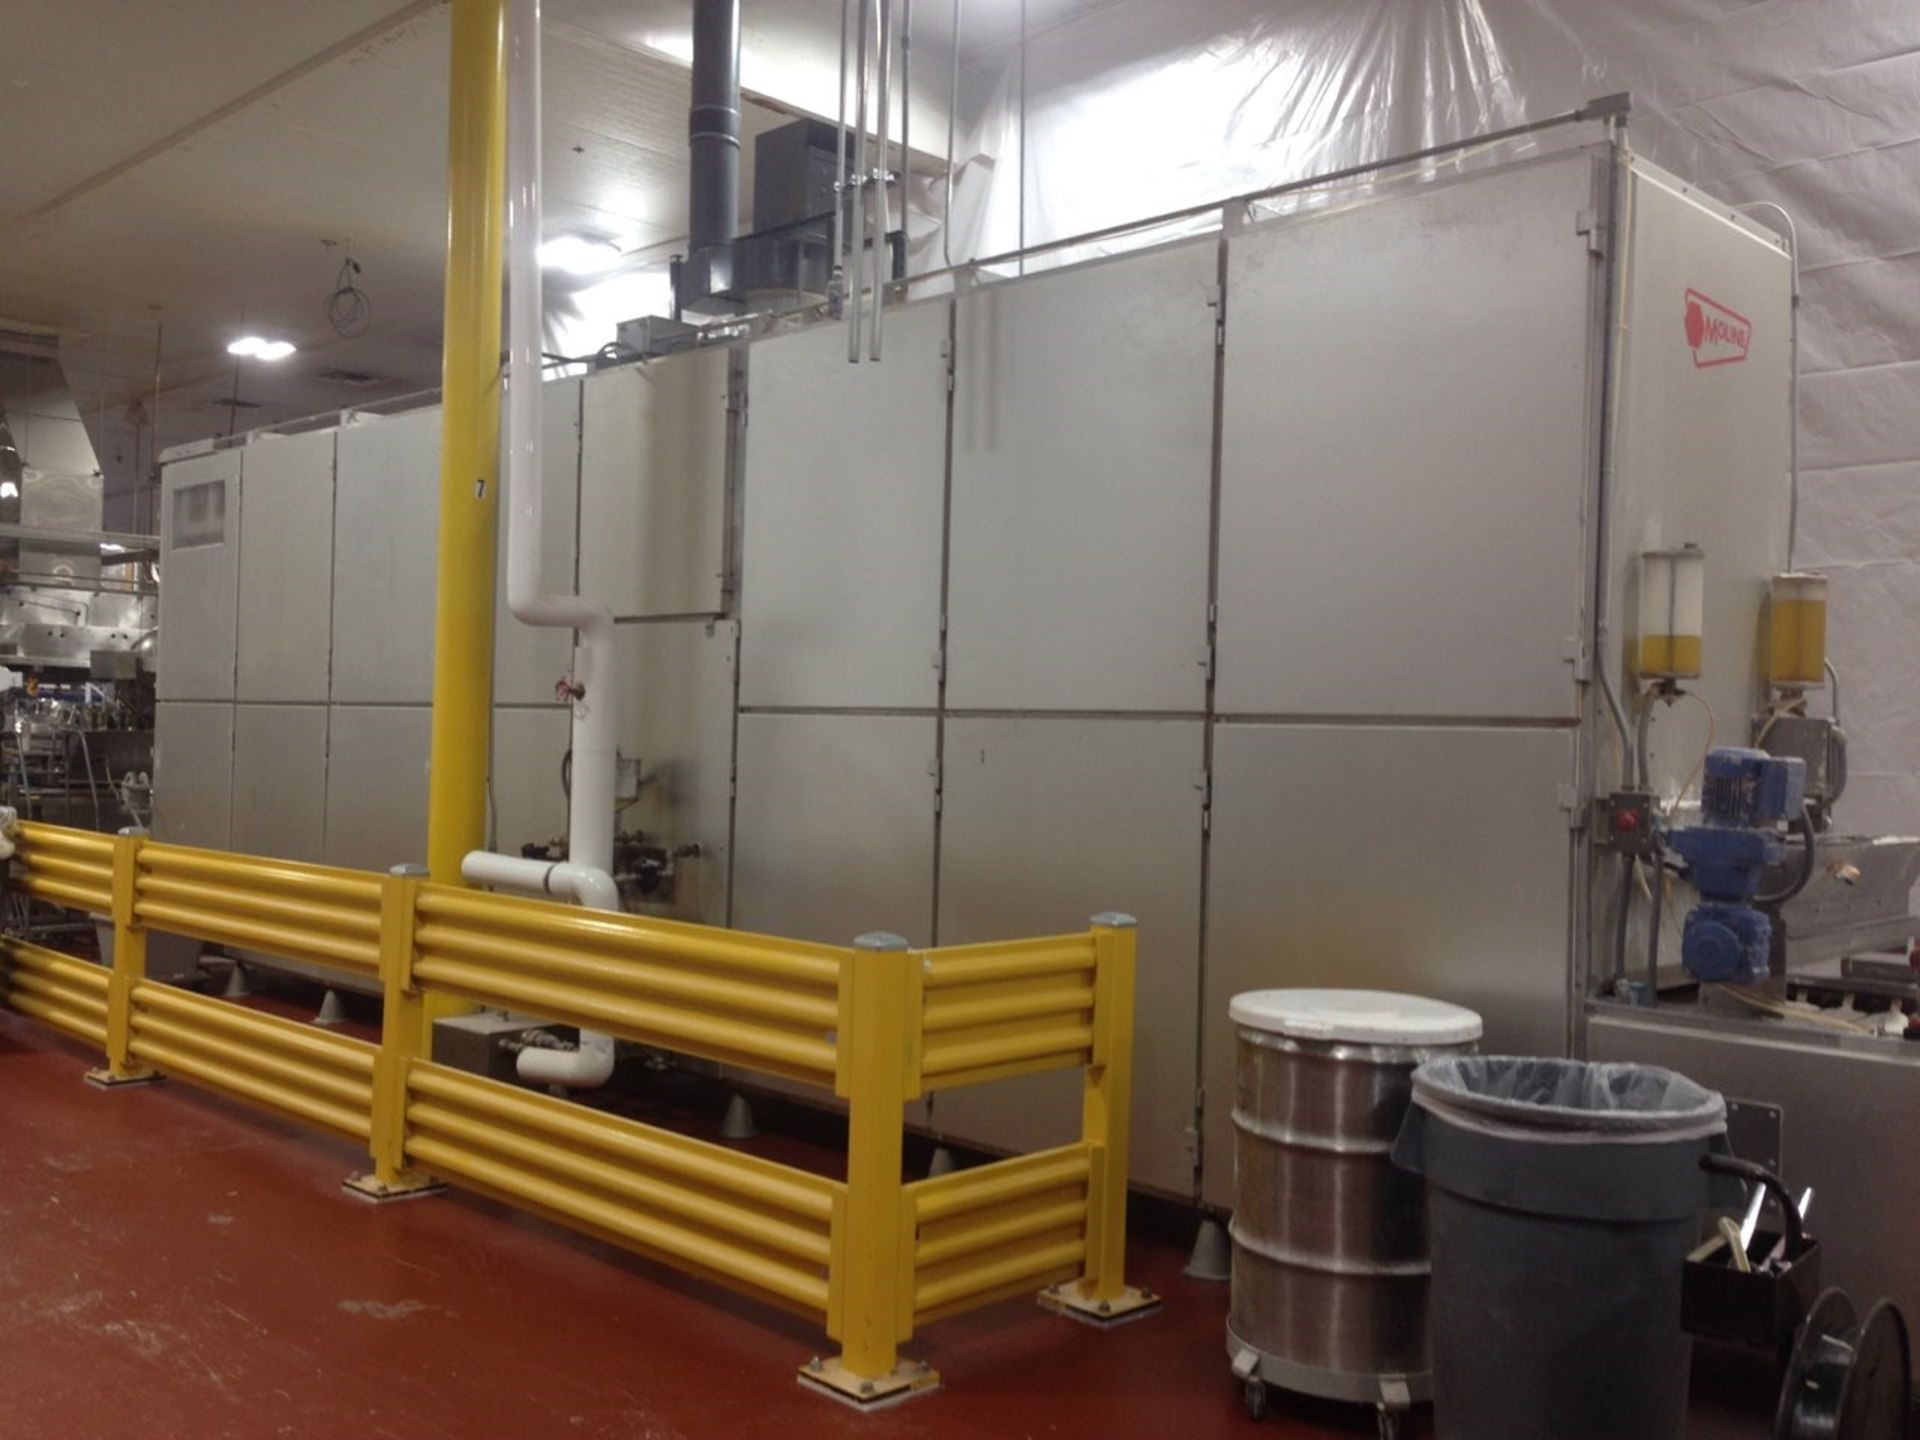 Moline S/S Proofer, M/N S8-8L, S/N P-92-645, Proofer is for Raw Product & Only has Trays that will